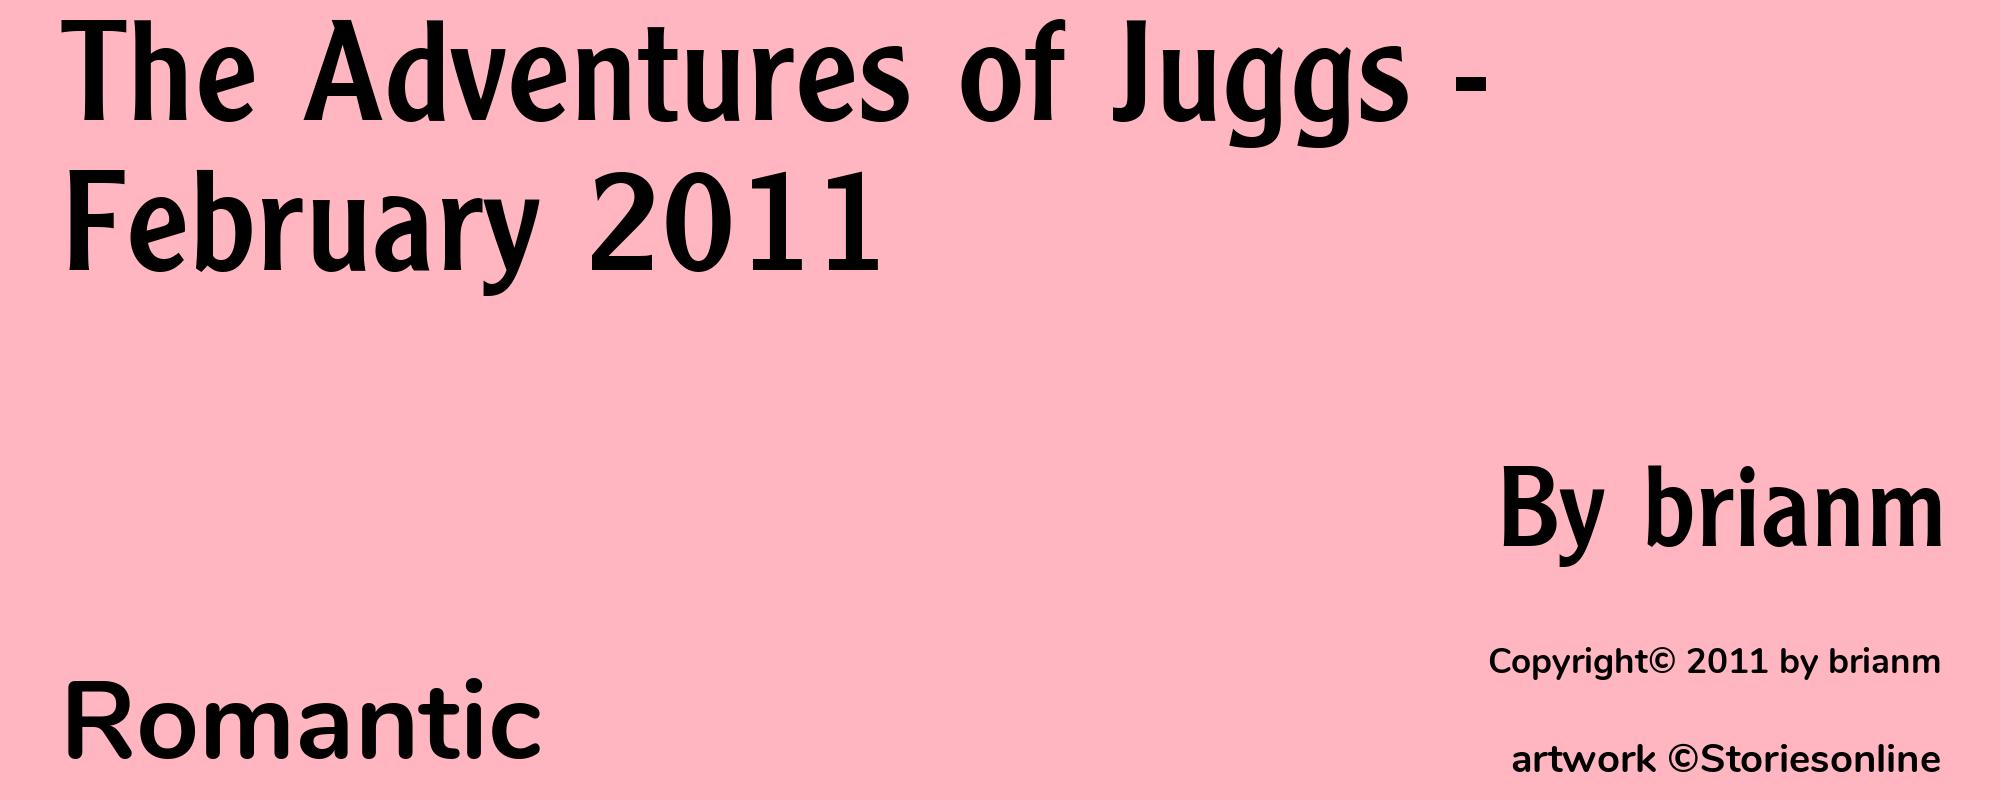 The Adventures of Juggs - February 2011 - Cover